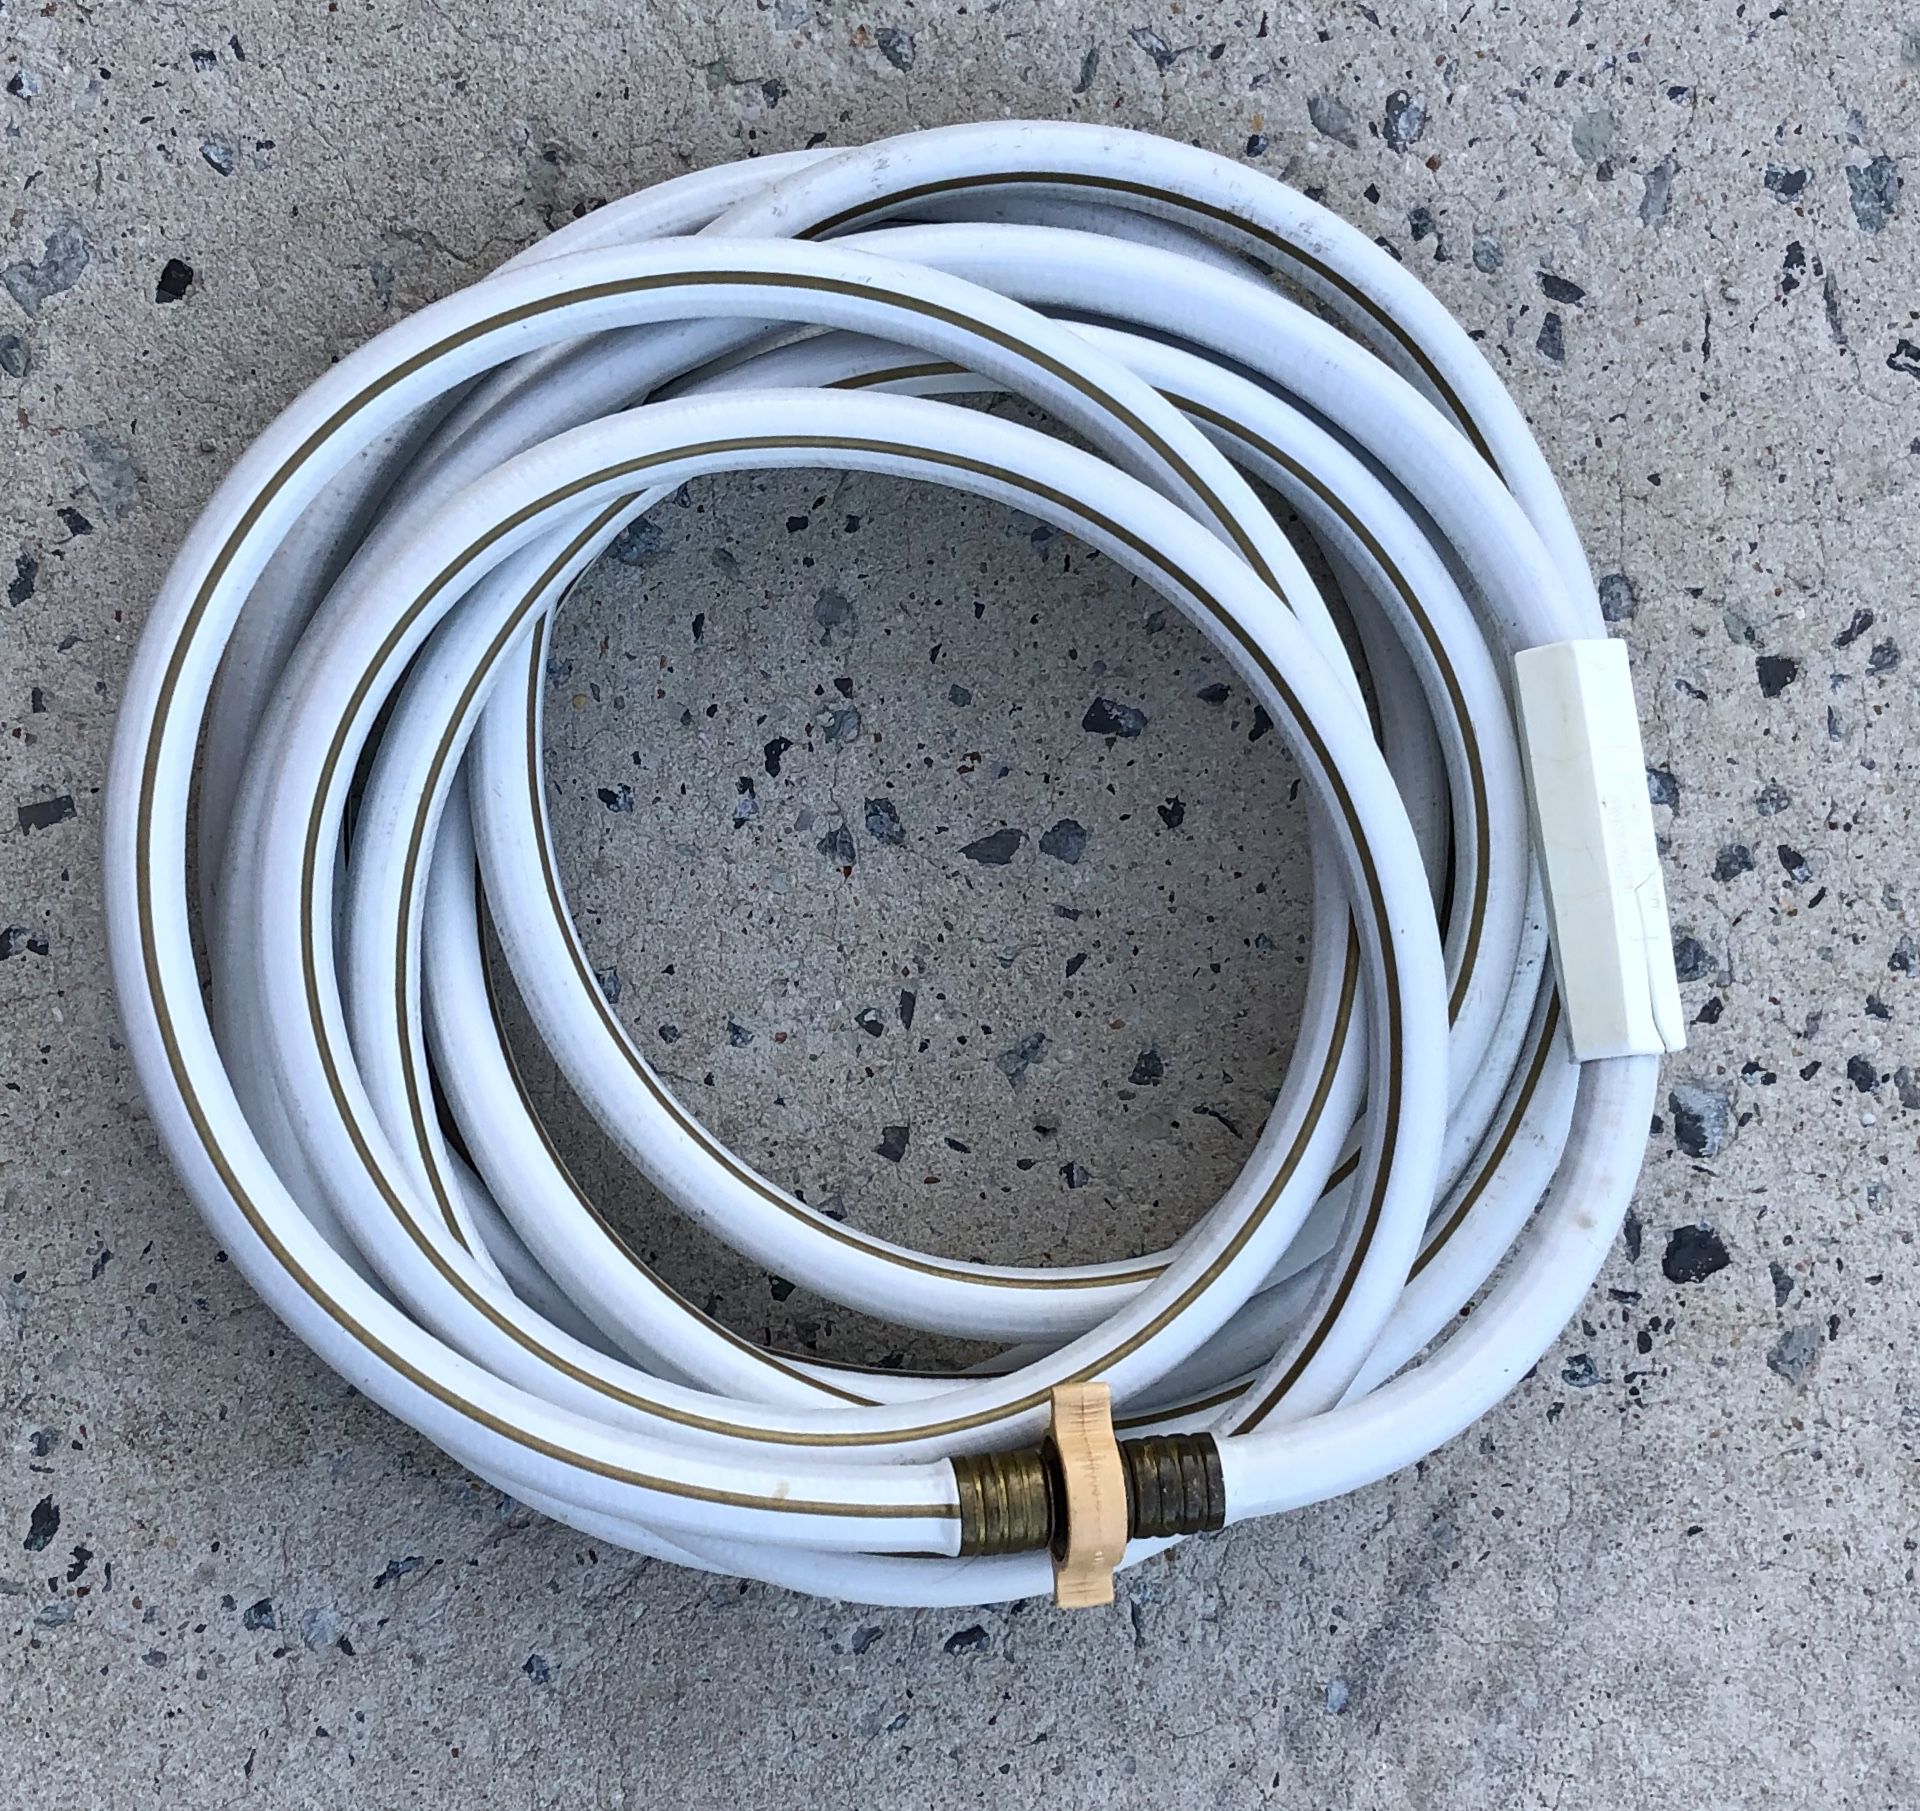 Qty 2 RV Freshwater Hose, 23’ long; $12 for the pair or $7 each